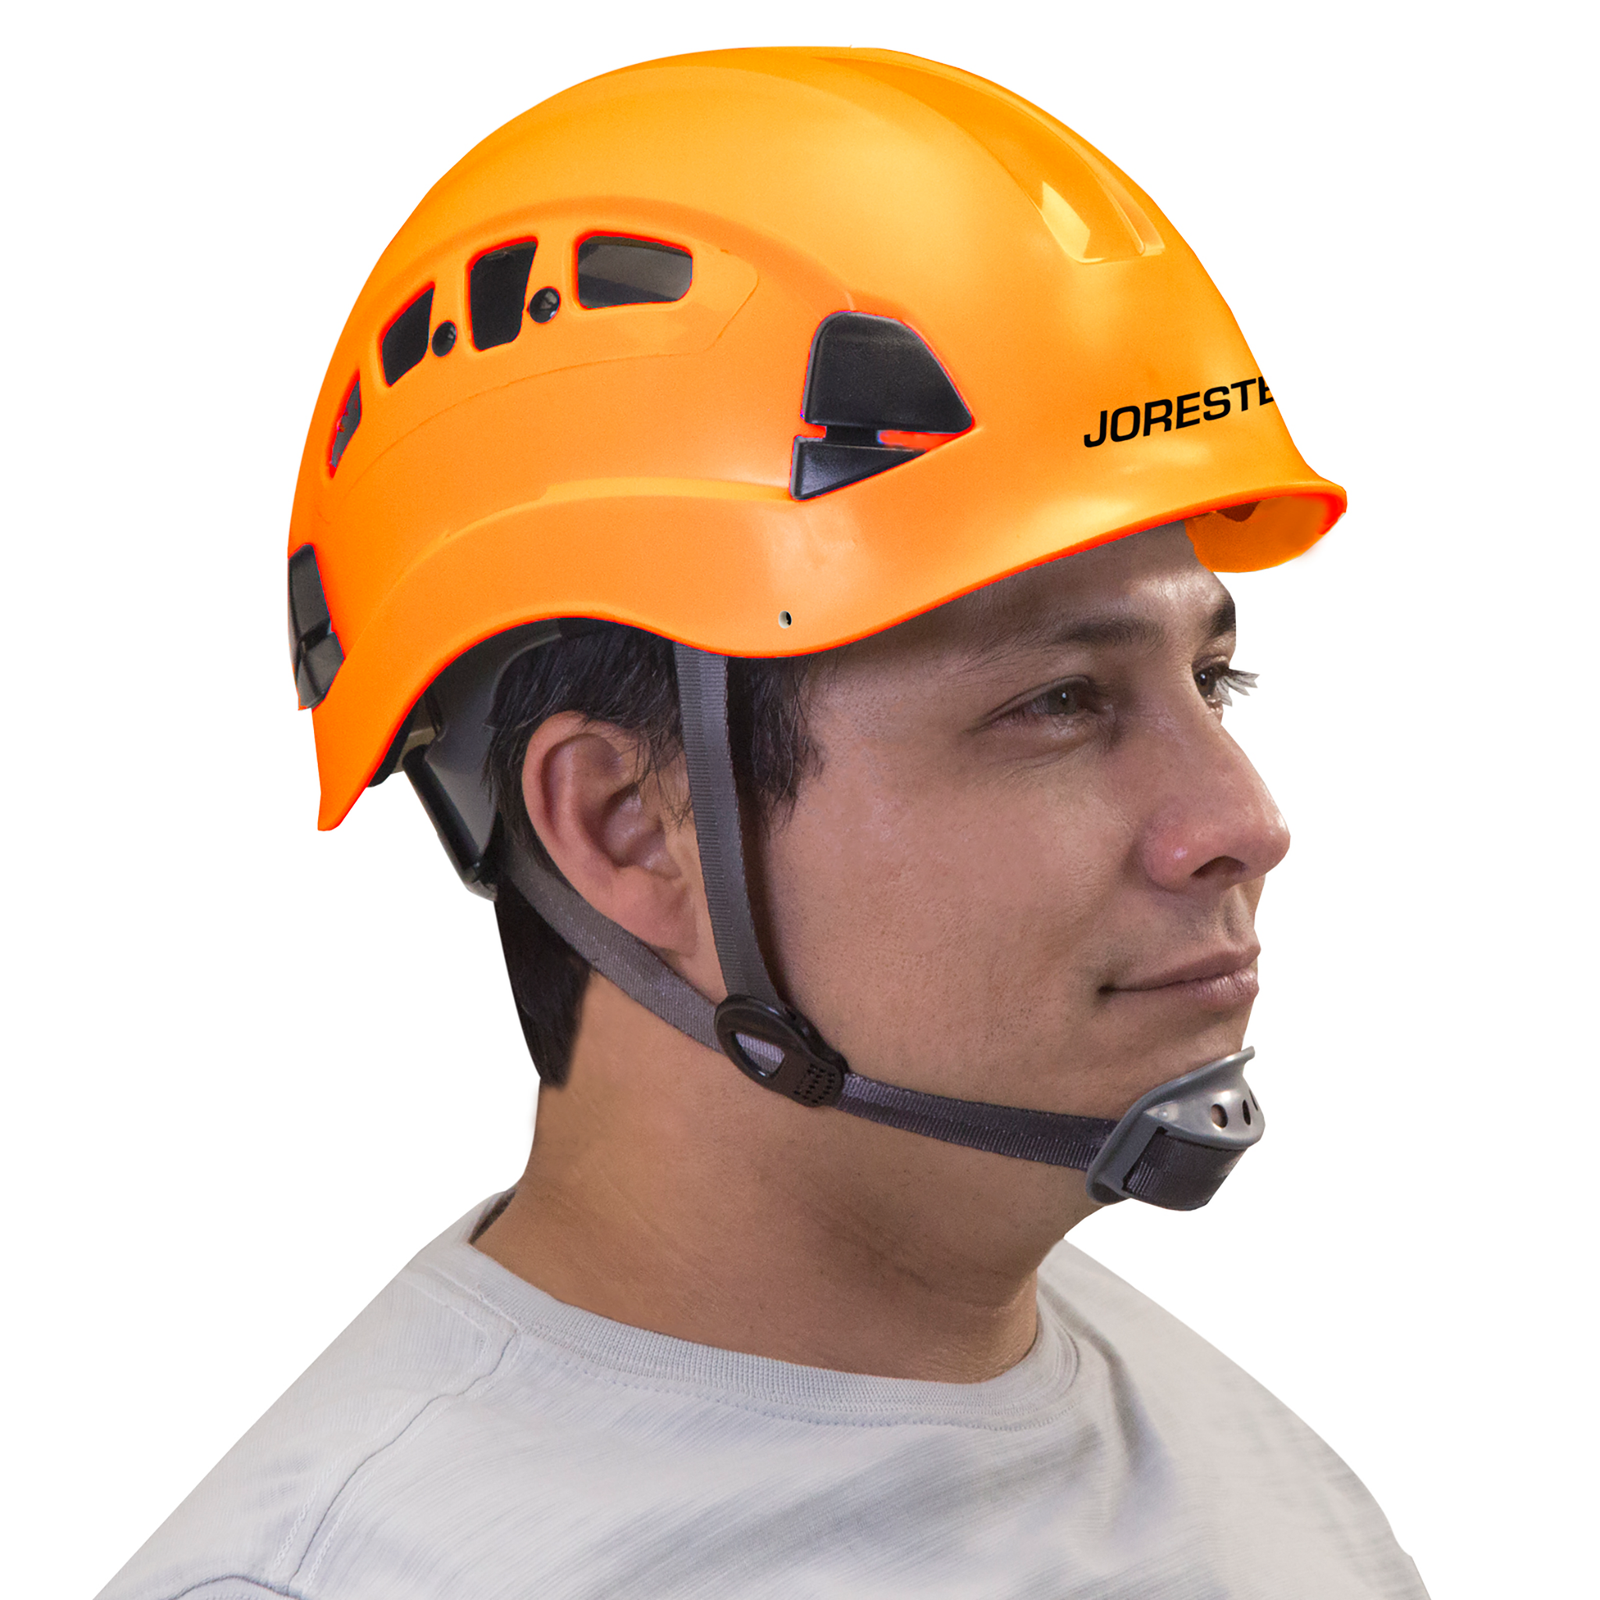 Man wearing the Jorestech orange ventilated hard hat for head protection with adjustable 6 point suspension and chin strap